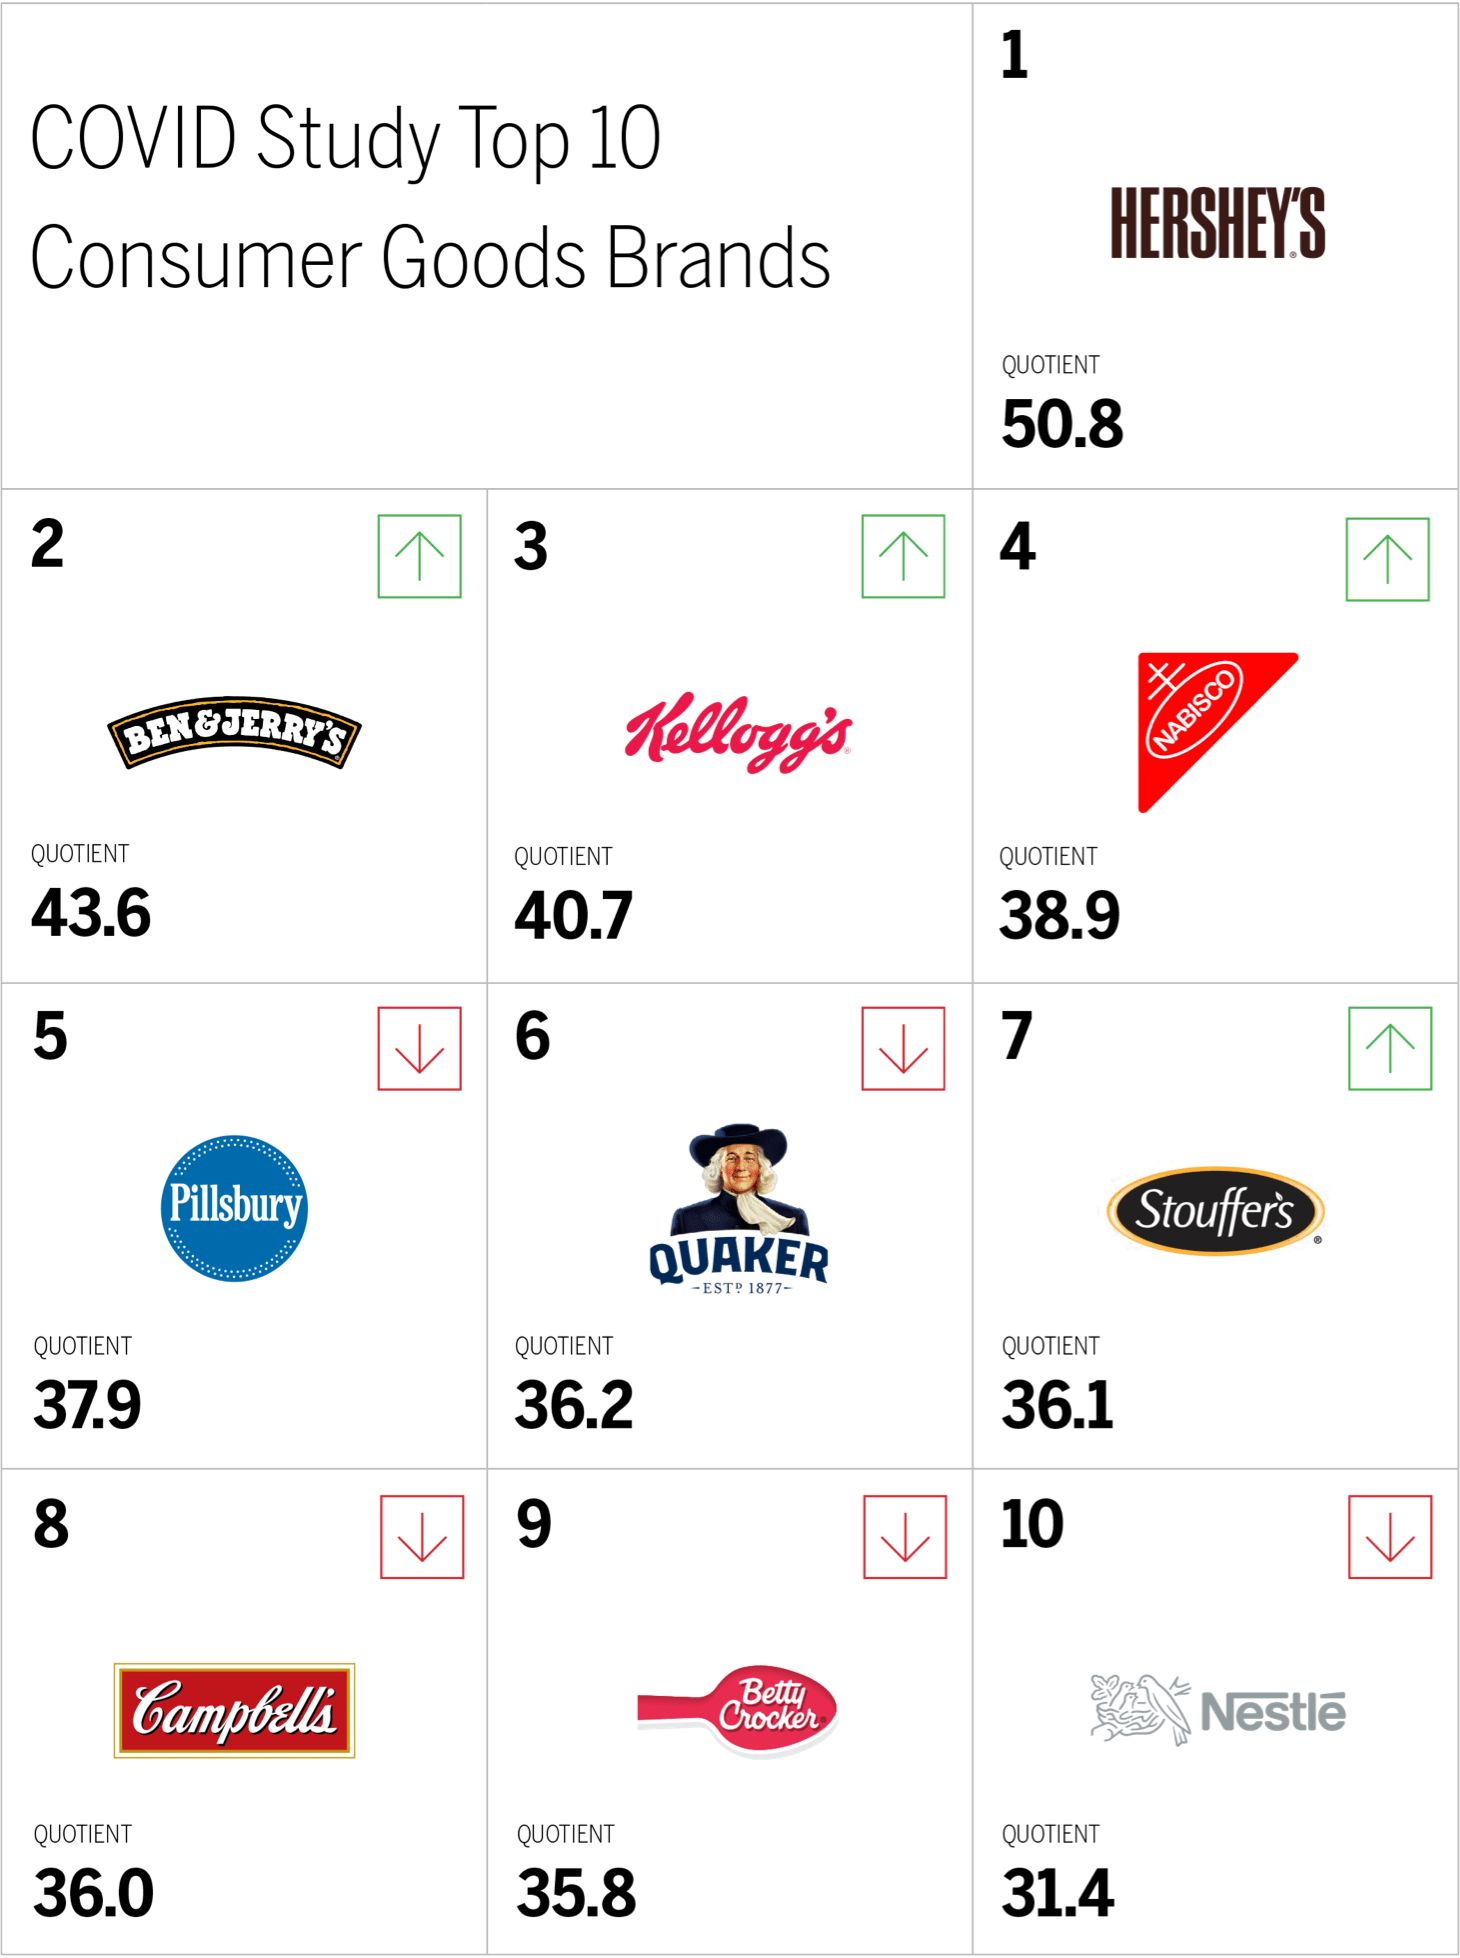 COVID Study Top 10
Consumer Goods Brands Chart